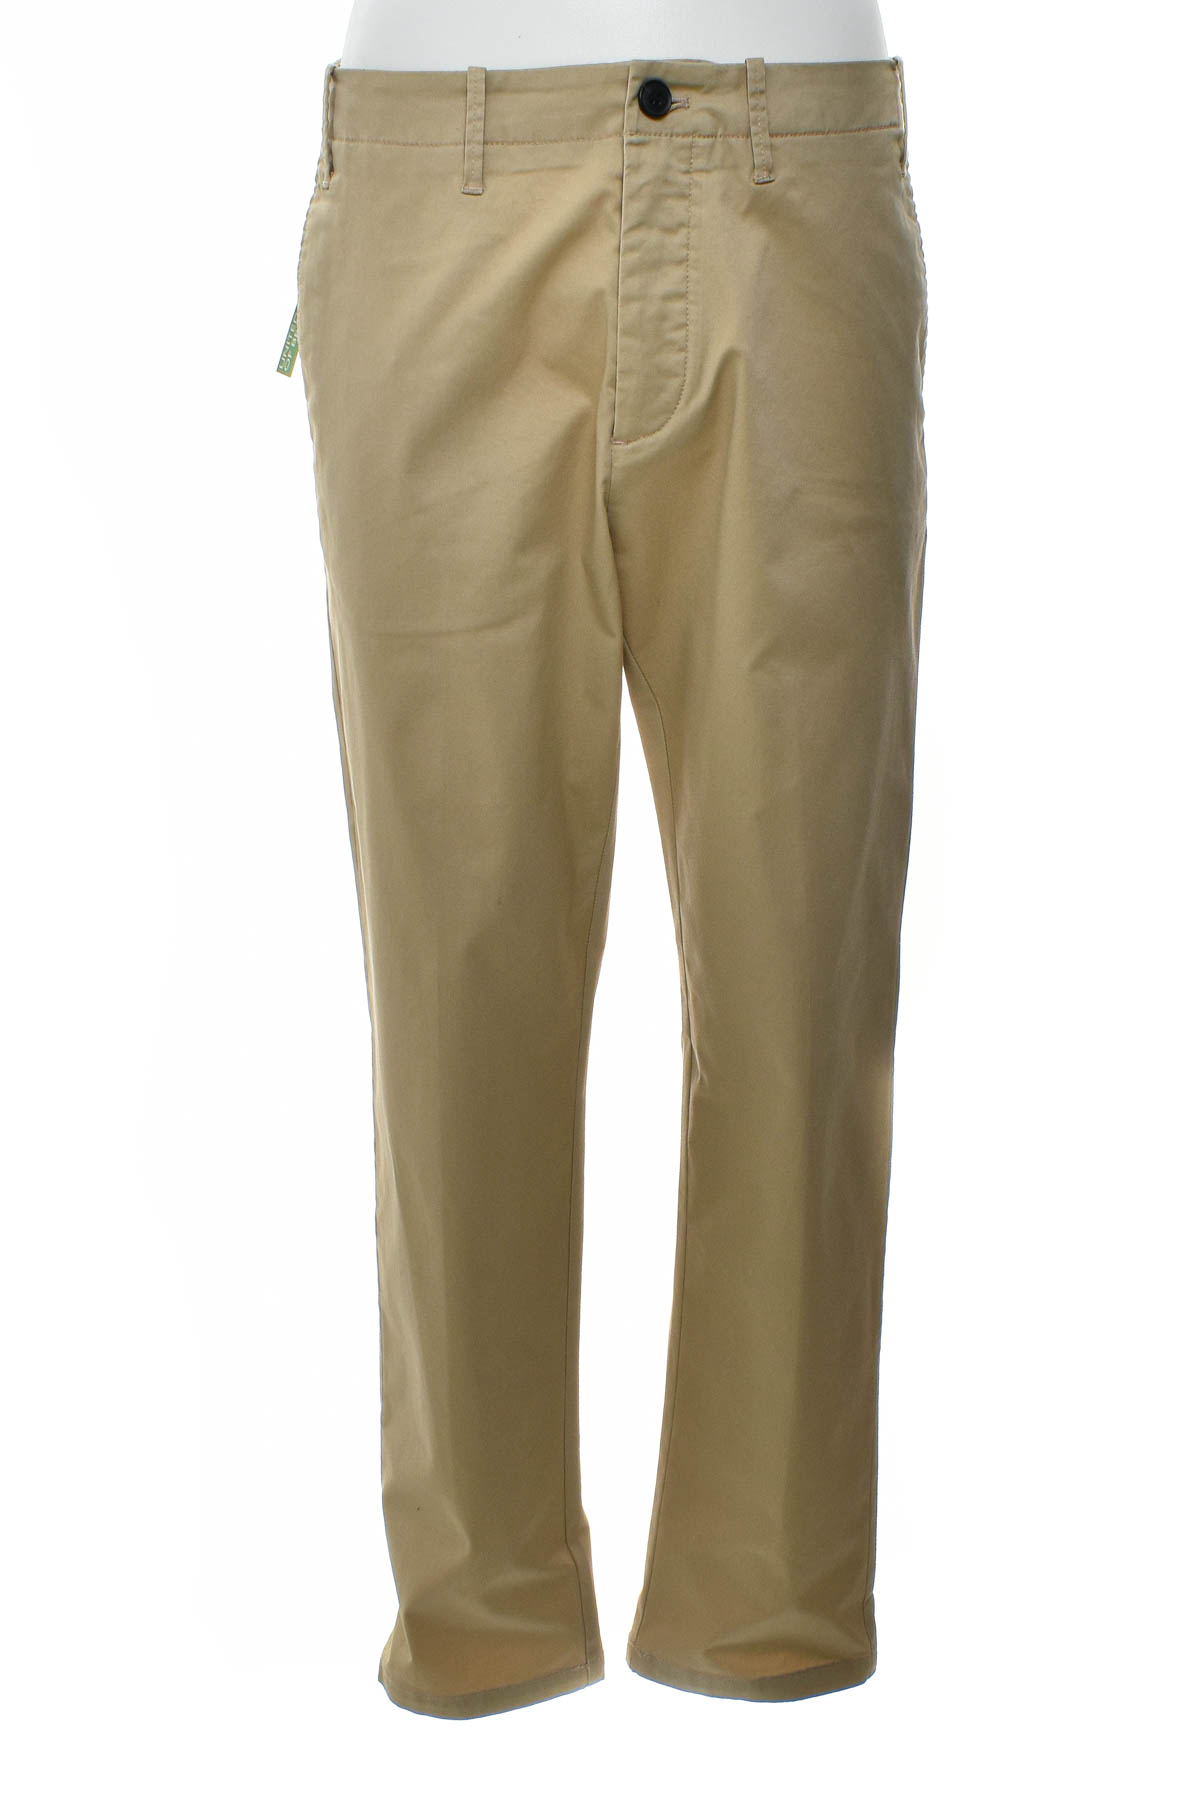 Men's trousers - United Colors of Benetton - 0